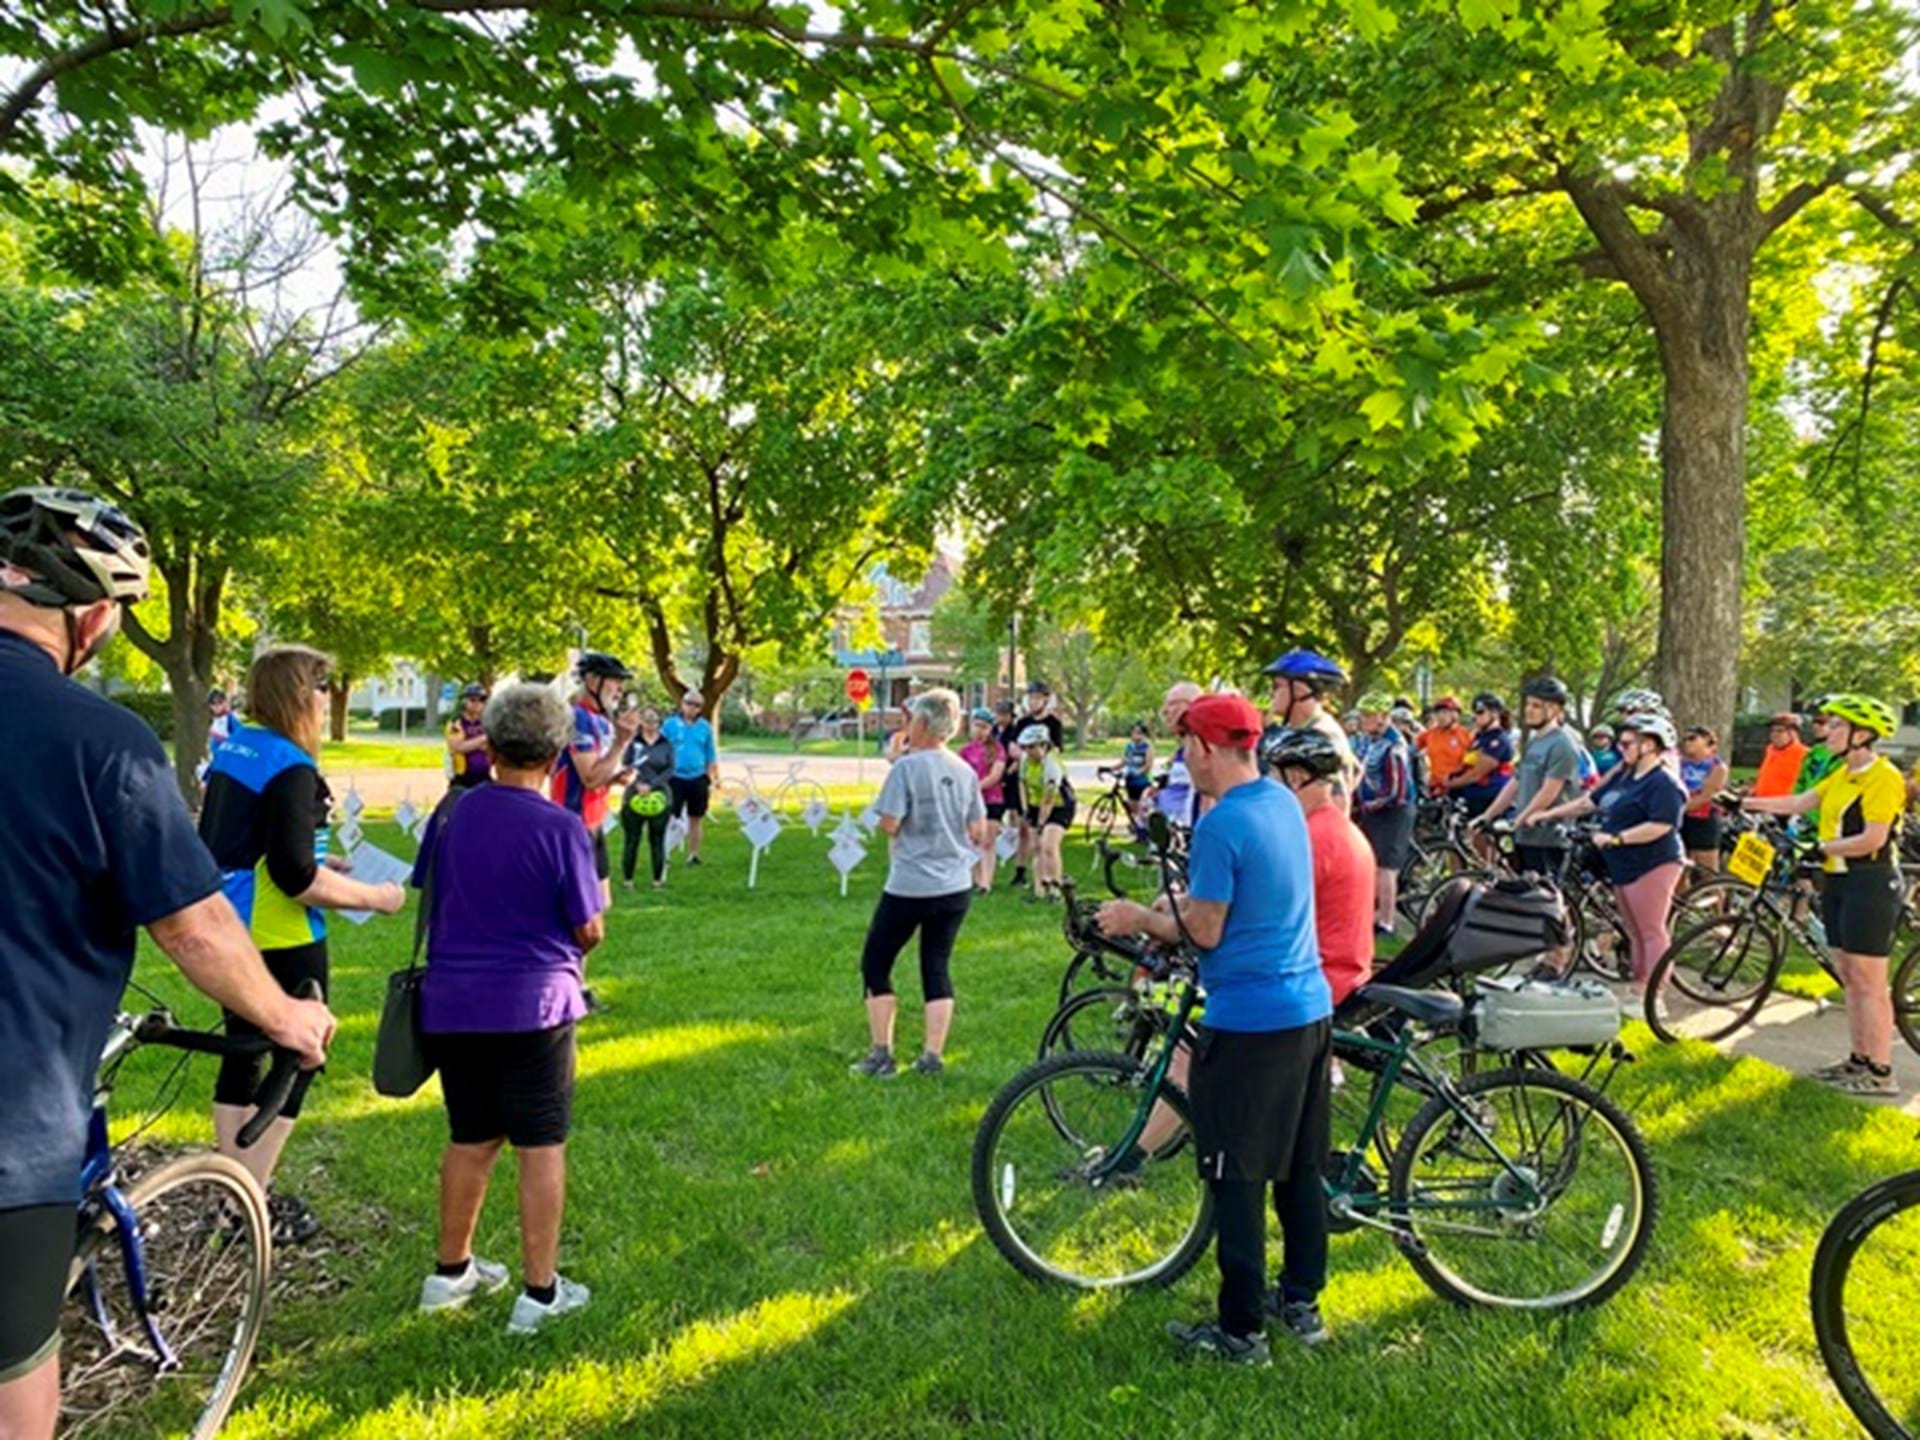 2022 Ride of Silence Ceremony